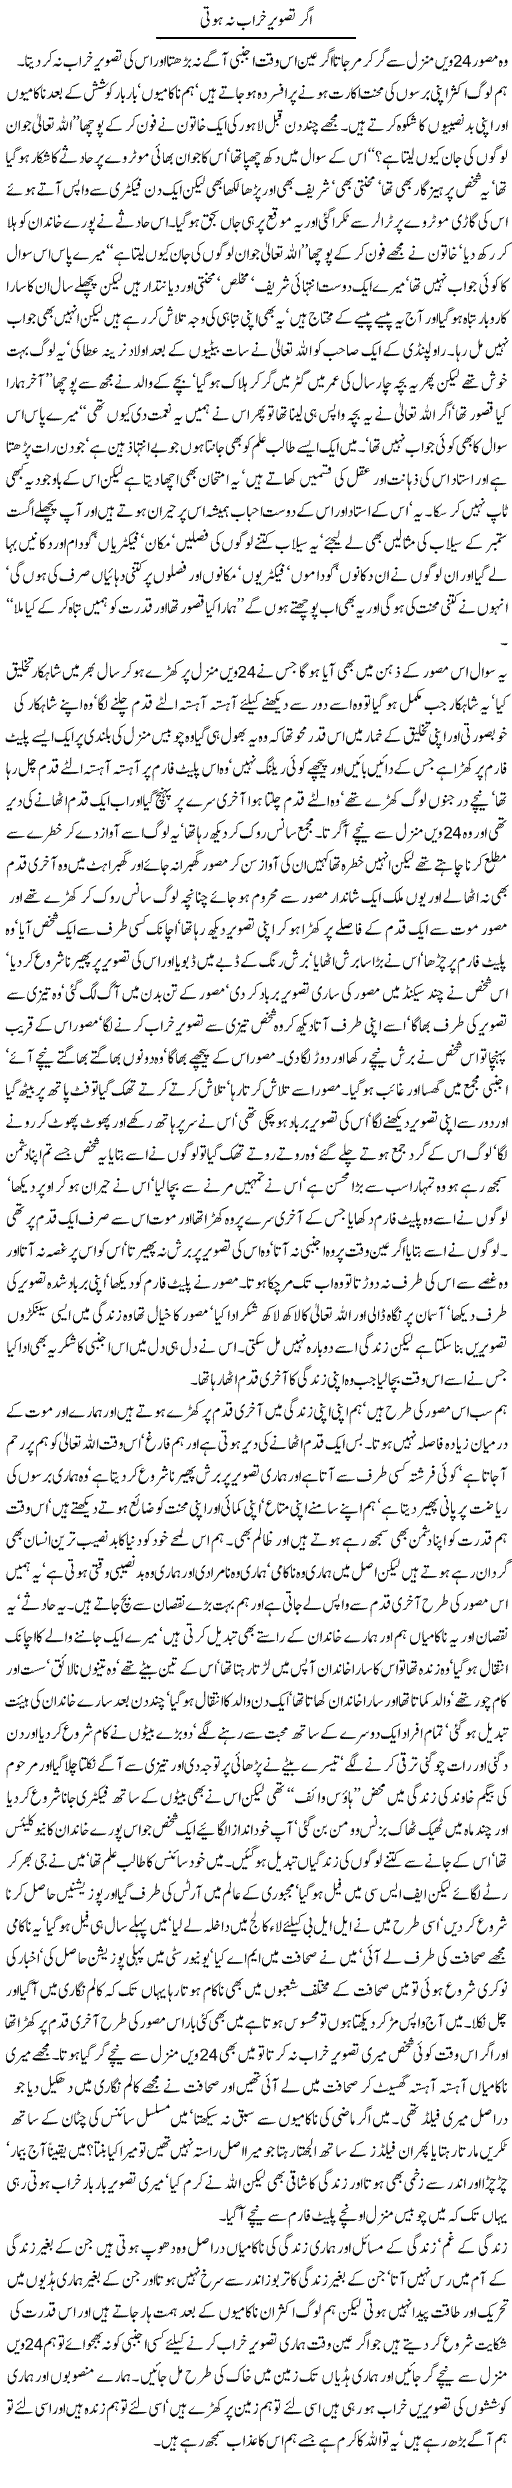 Bad Image Express Column Javed Chaudhry 27 March 2011